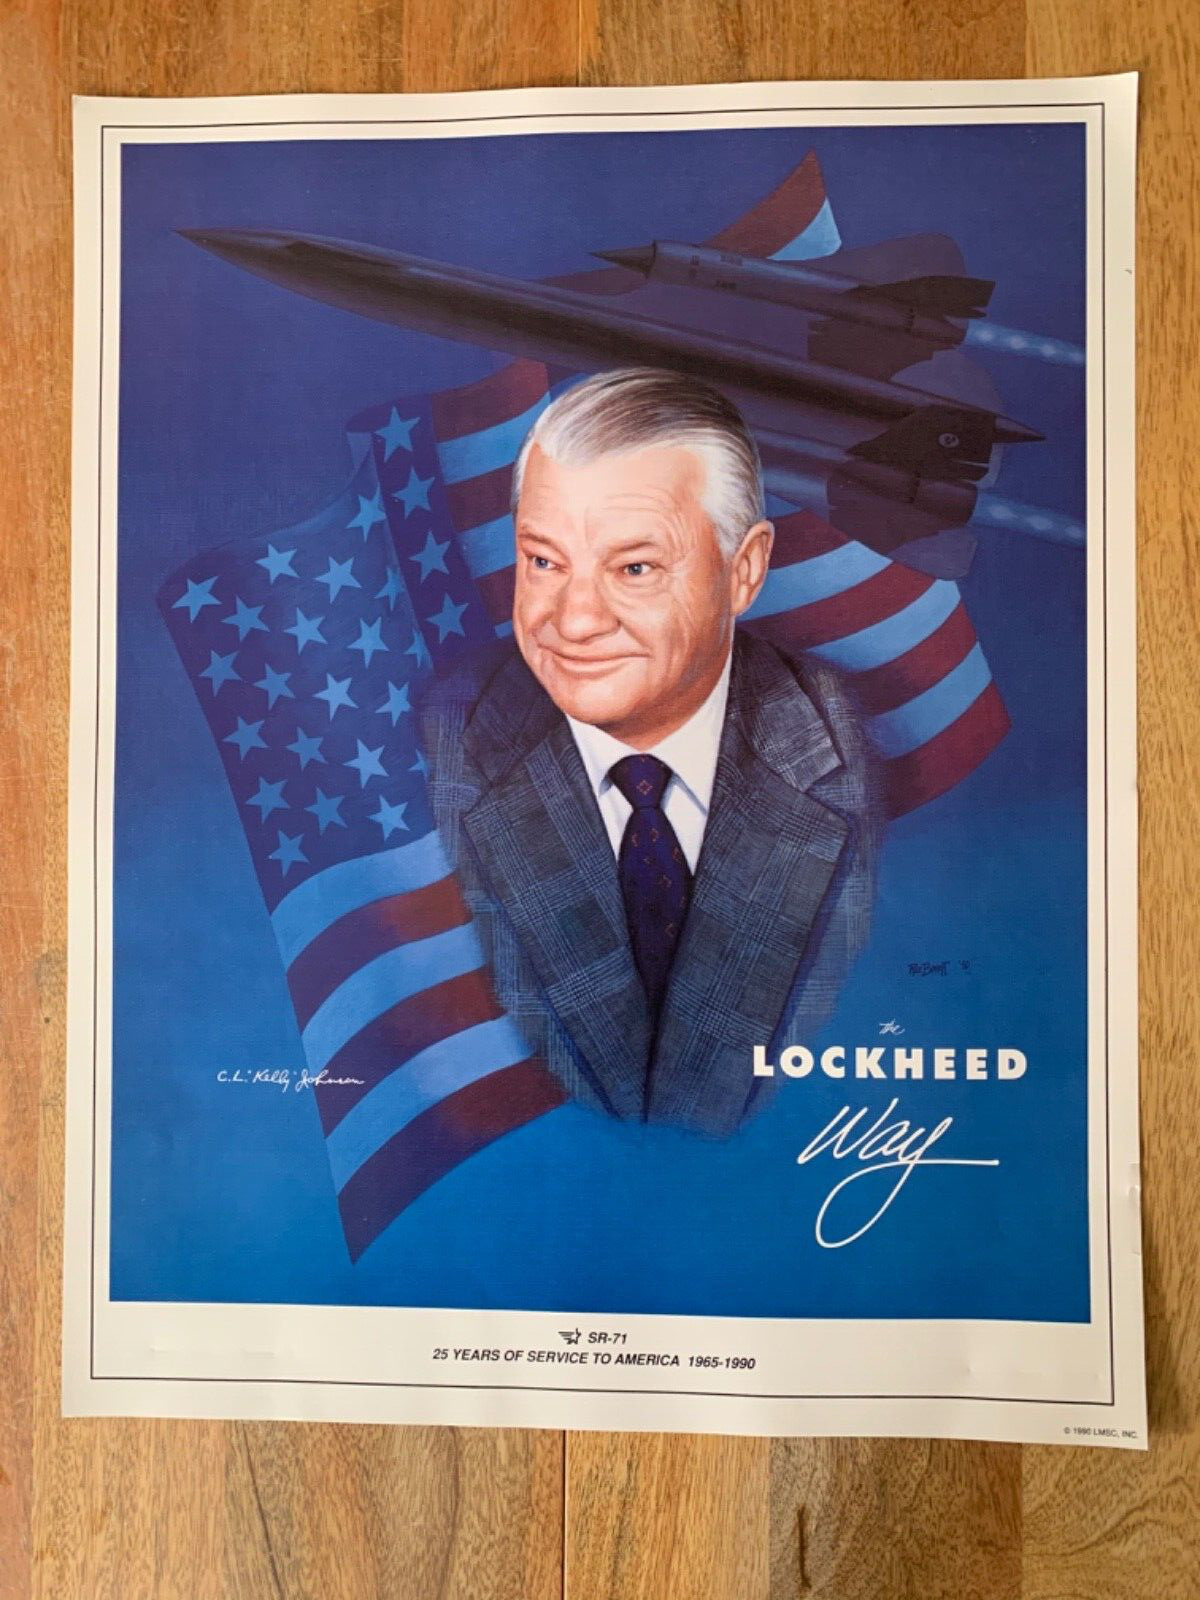 The Lockheed Way Poster CL Kelly Johnson SR-71 25 Years of Service 1965-1990